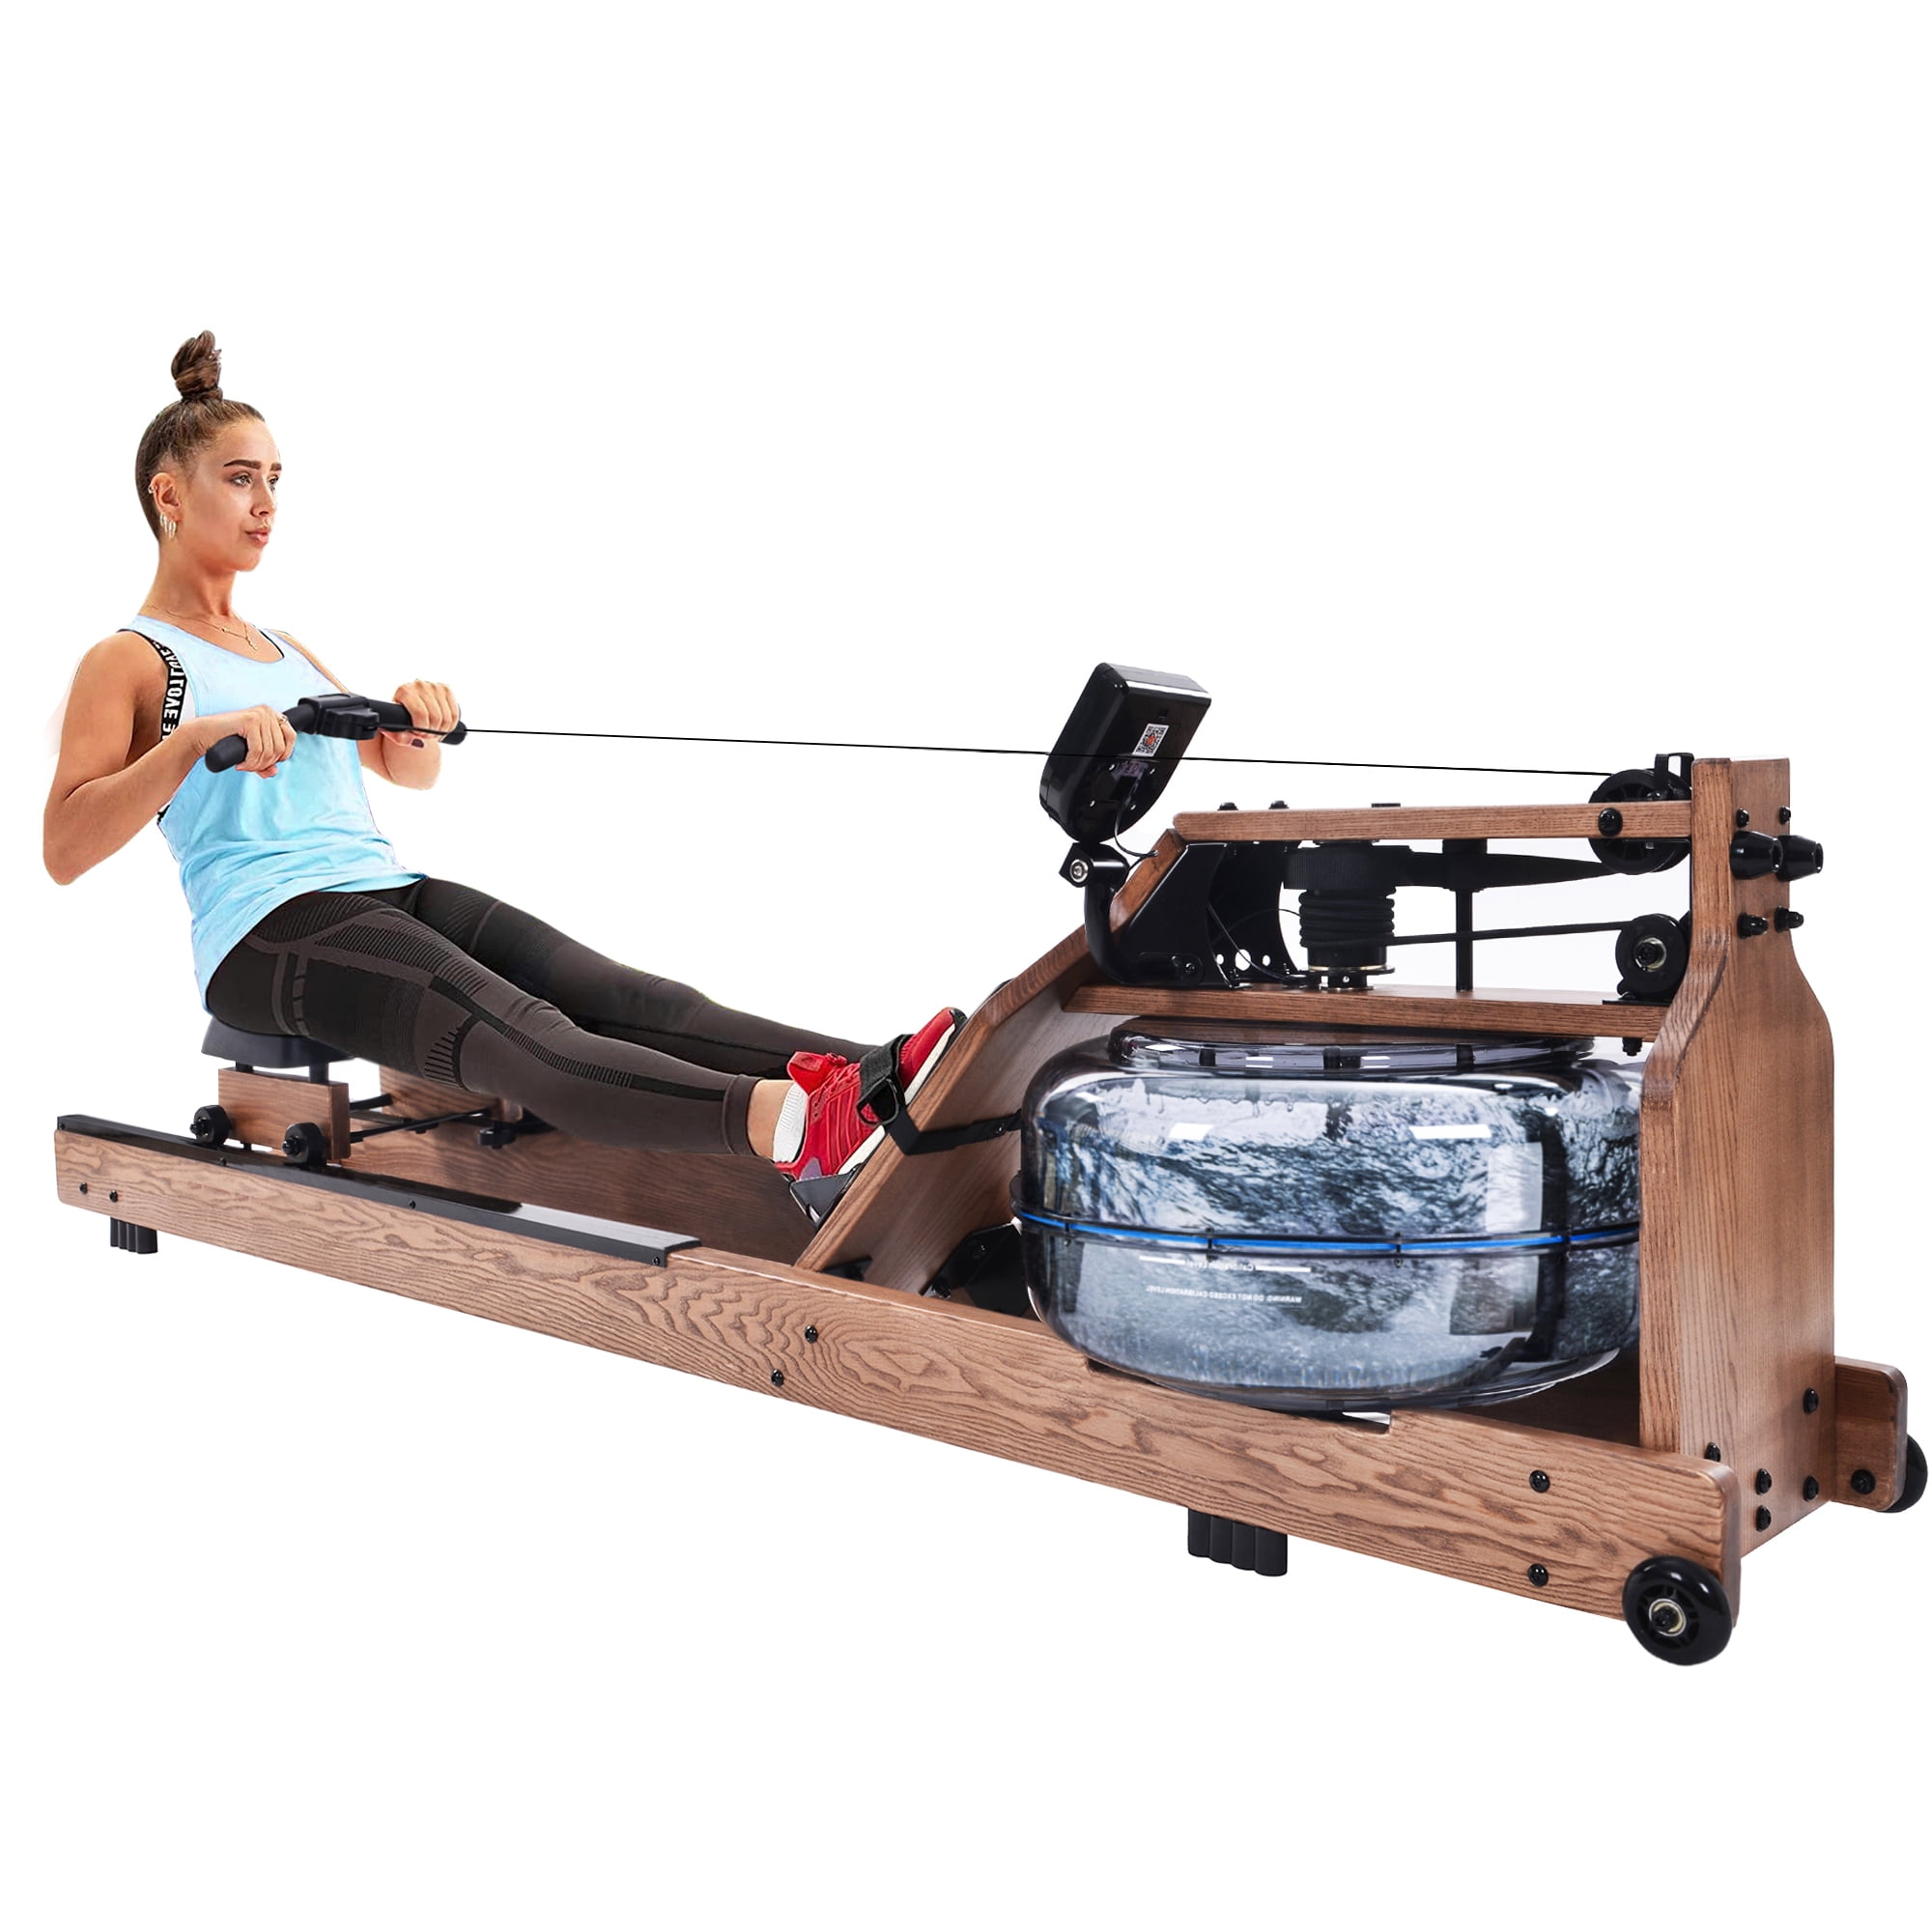 GYM ENERGY Foldable Water Rowing Machine for Home Gym Fitness Included an Dust Cover and Phone Holder Wood Rower with Bluetooth Monitor,Indoor Cardio Training with Whole Body Exercise 